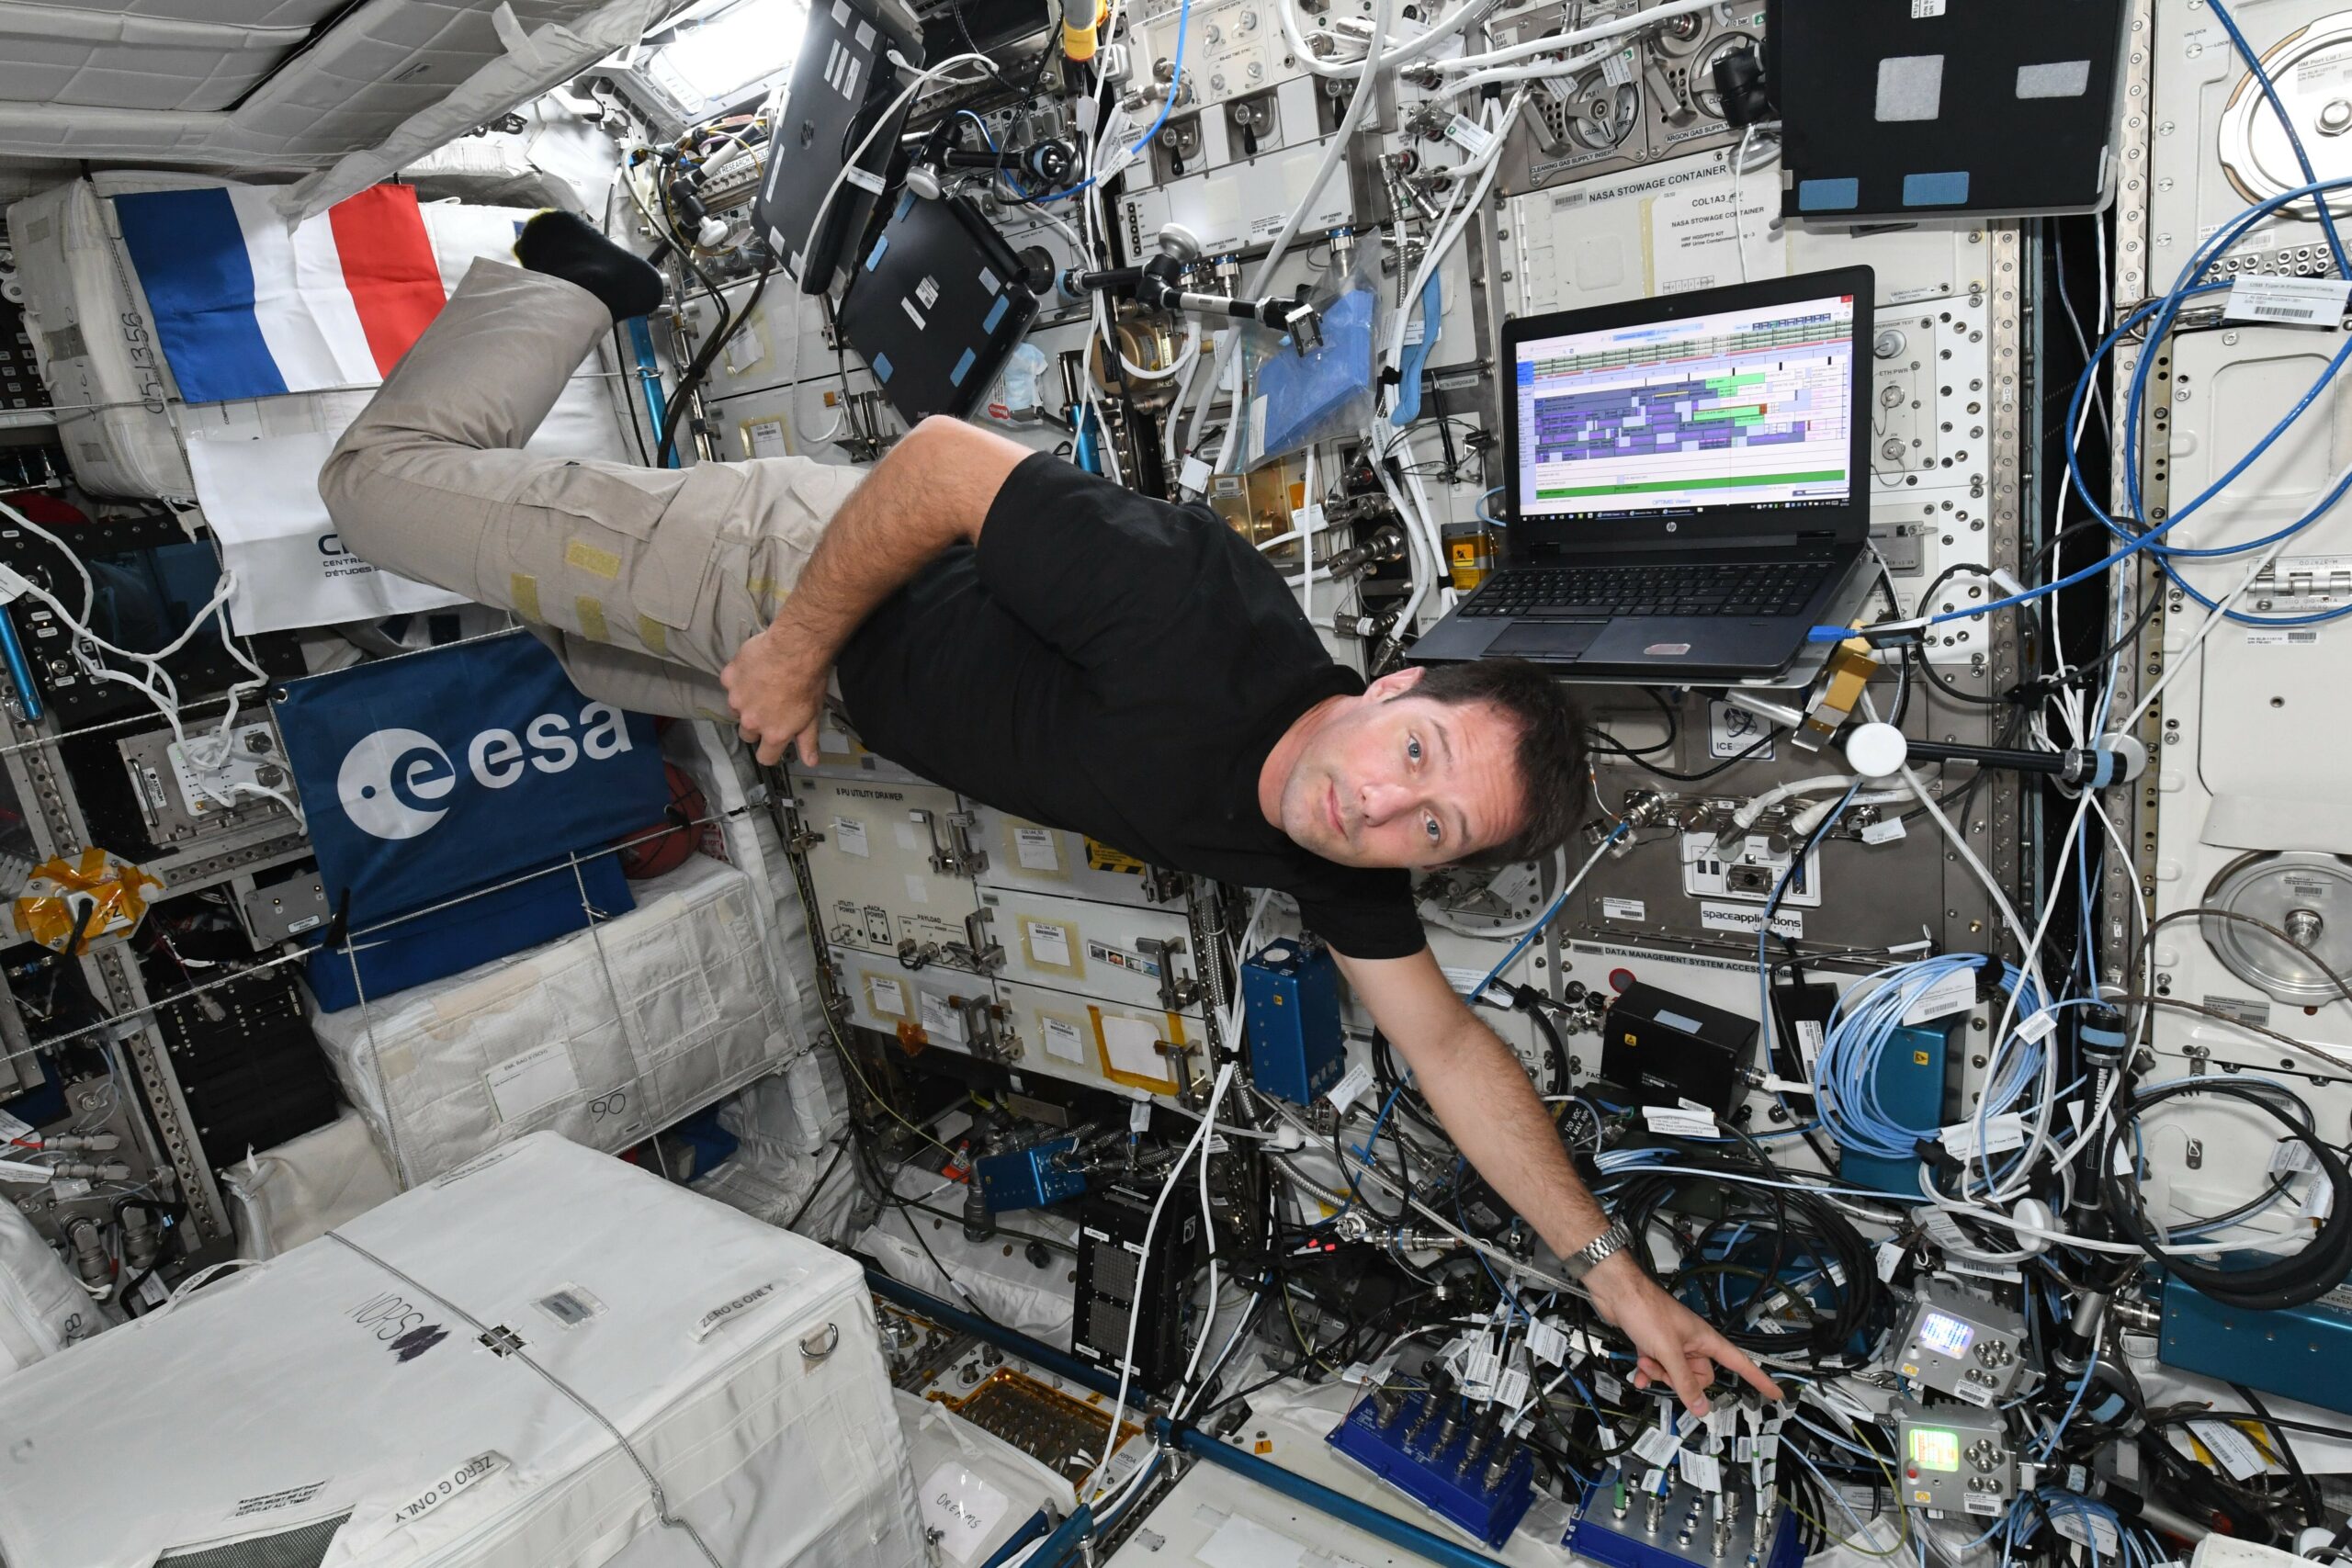 ESA Astronaut Thomas Pesquet with the Astro Pi computers aboard the International Space Station